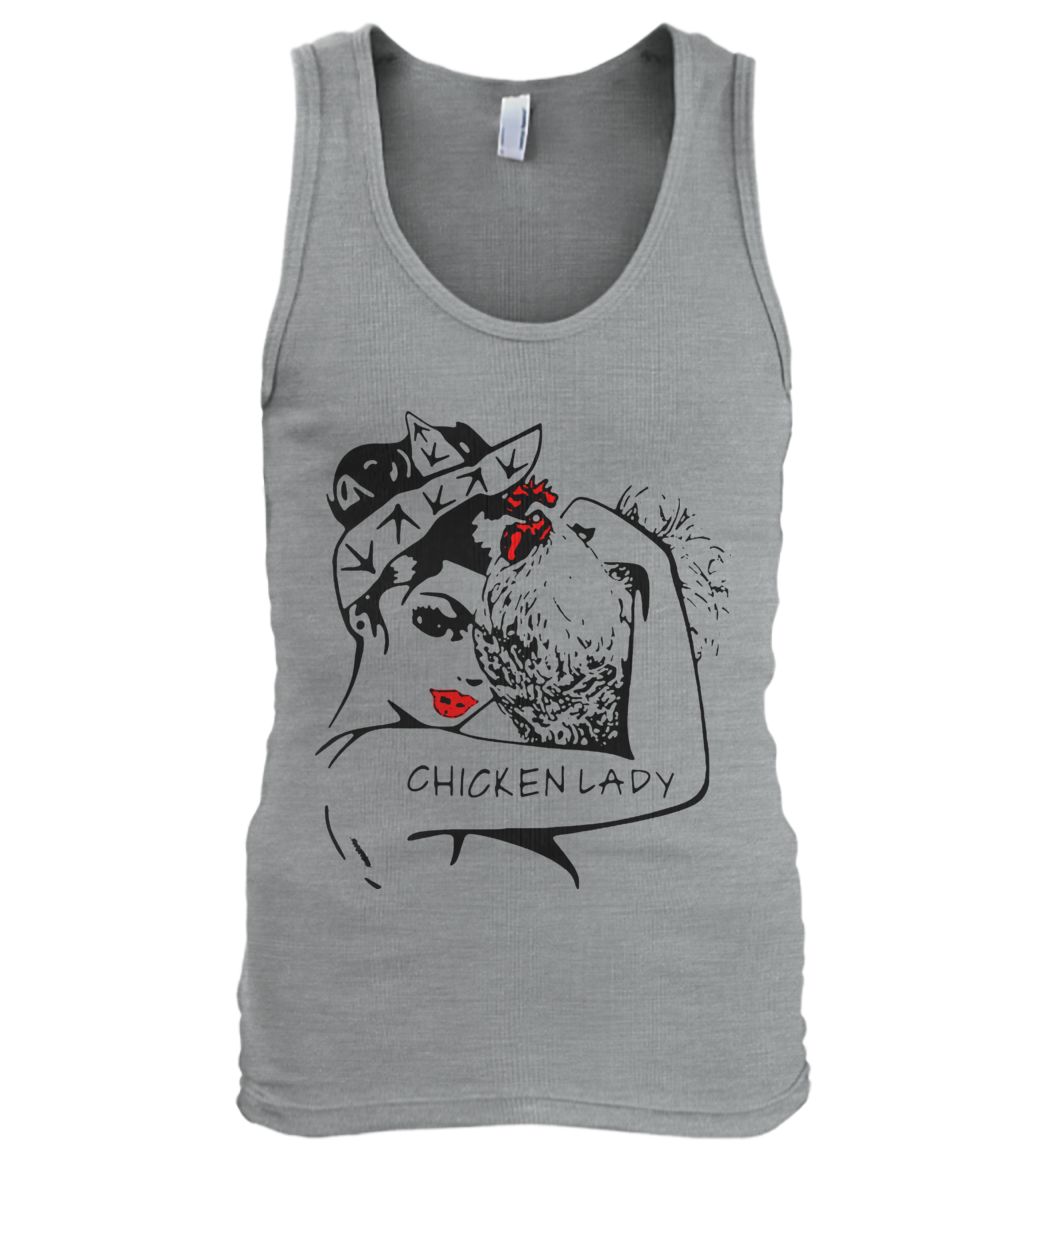 Chicken and unbreakable strong woman chicken lady men's tank top